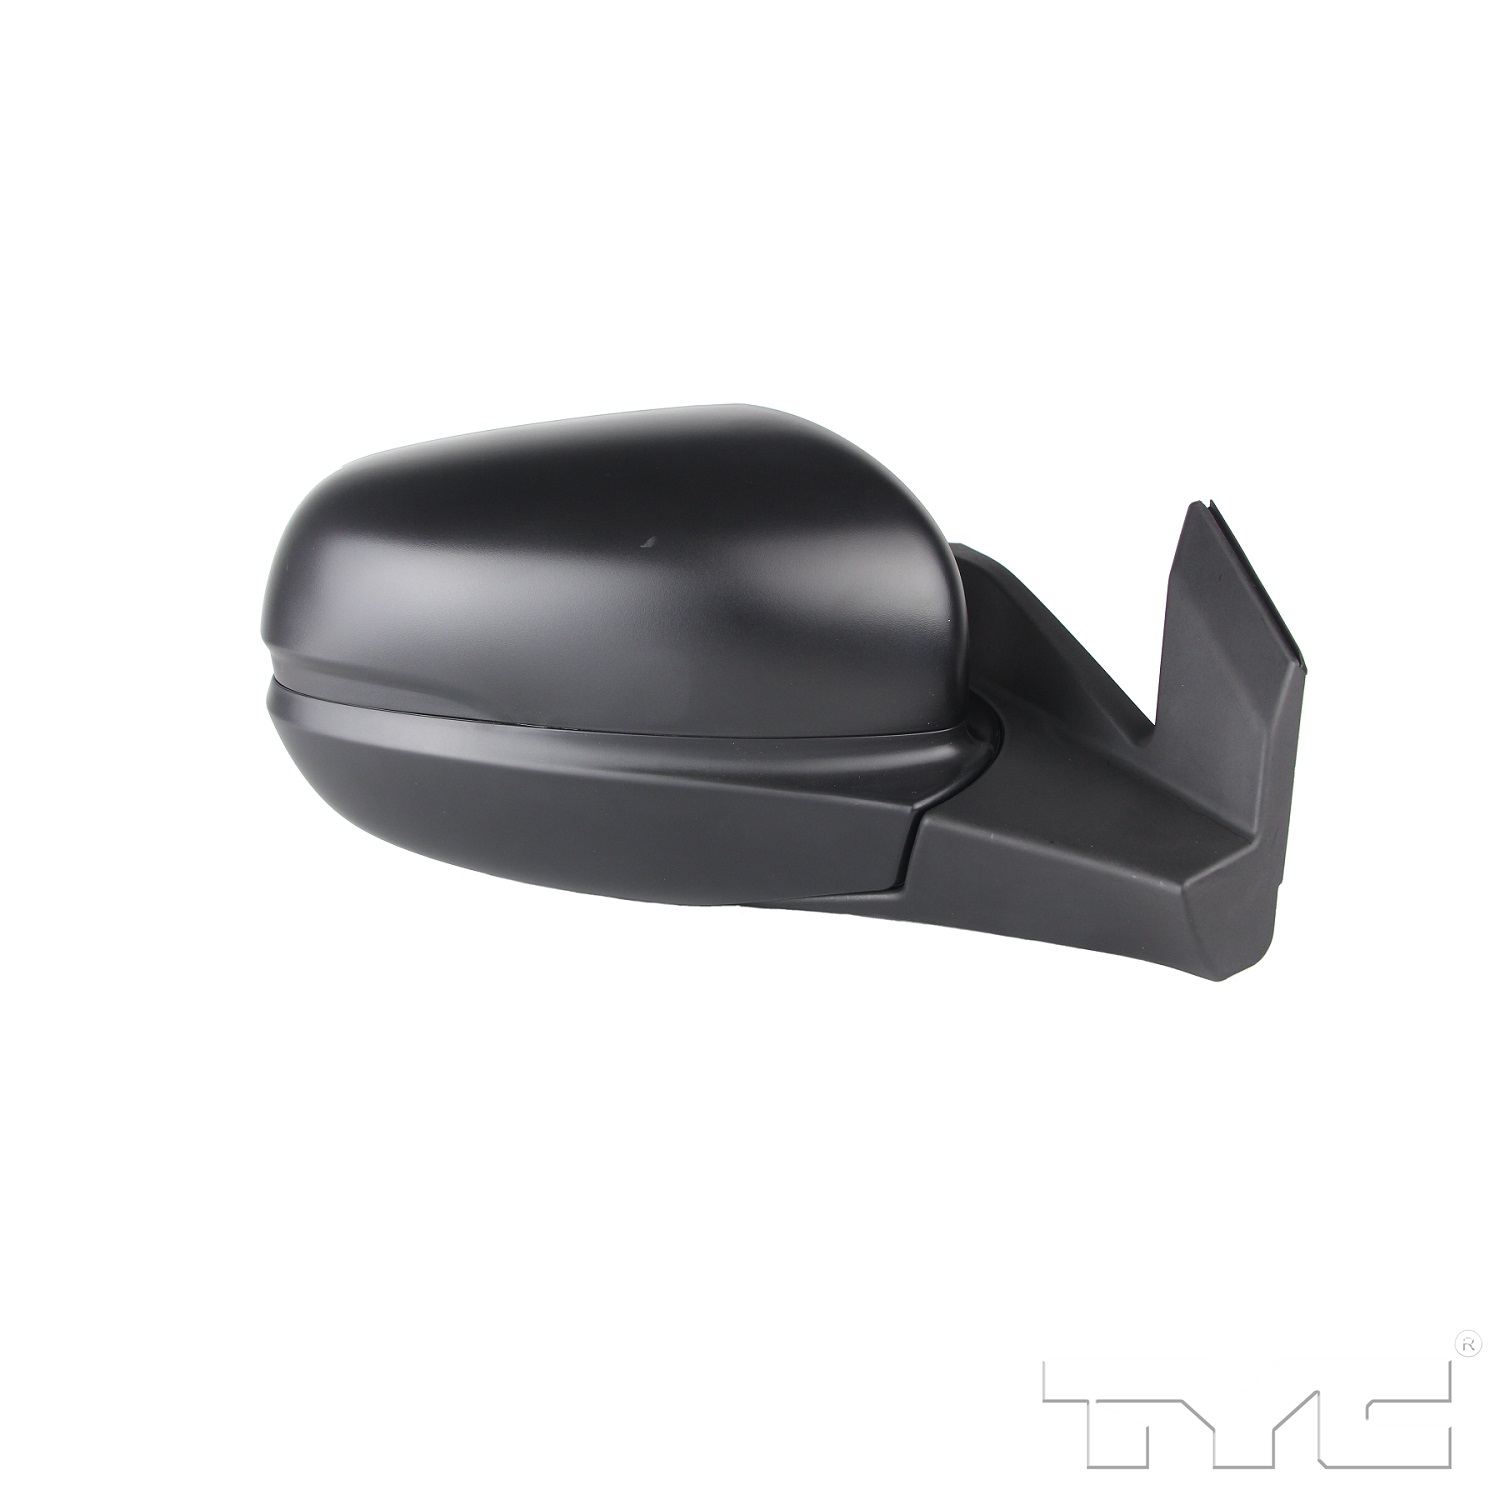 Aftermarket MIRRORS for HONDA - PILOT, PILOT,16-18,RT Mirror outside rear view